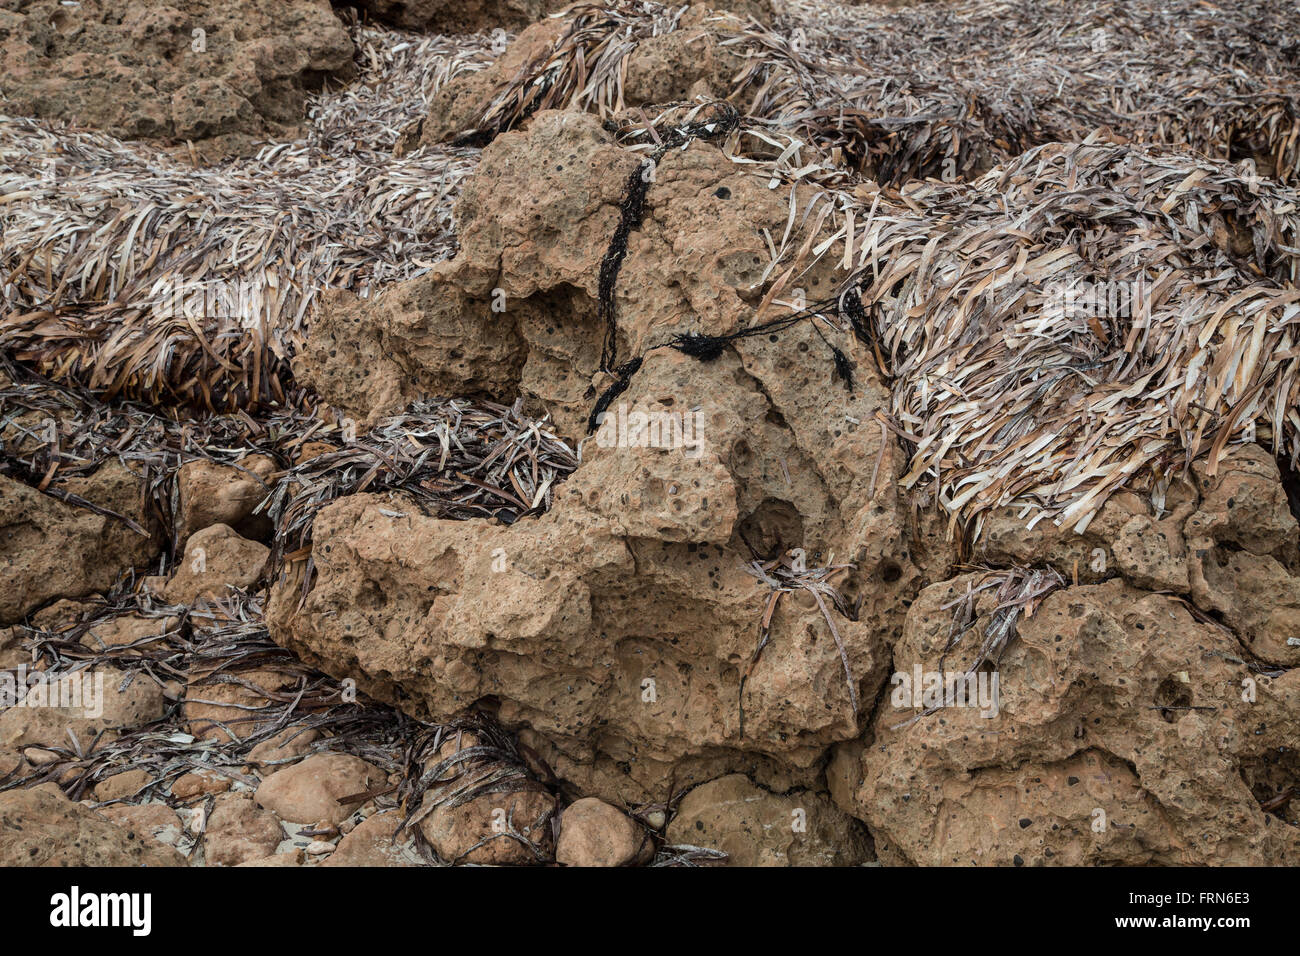 volcanic rocks and dry seaweed on beach, close-up Stock Photo